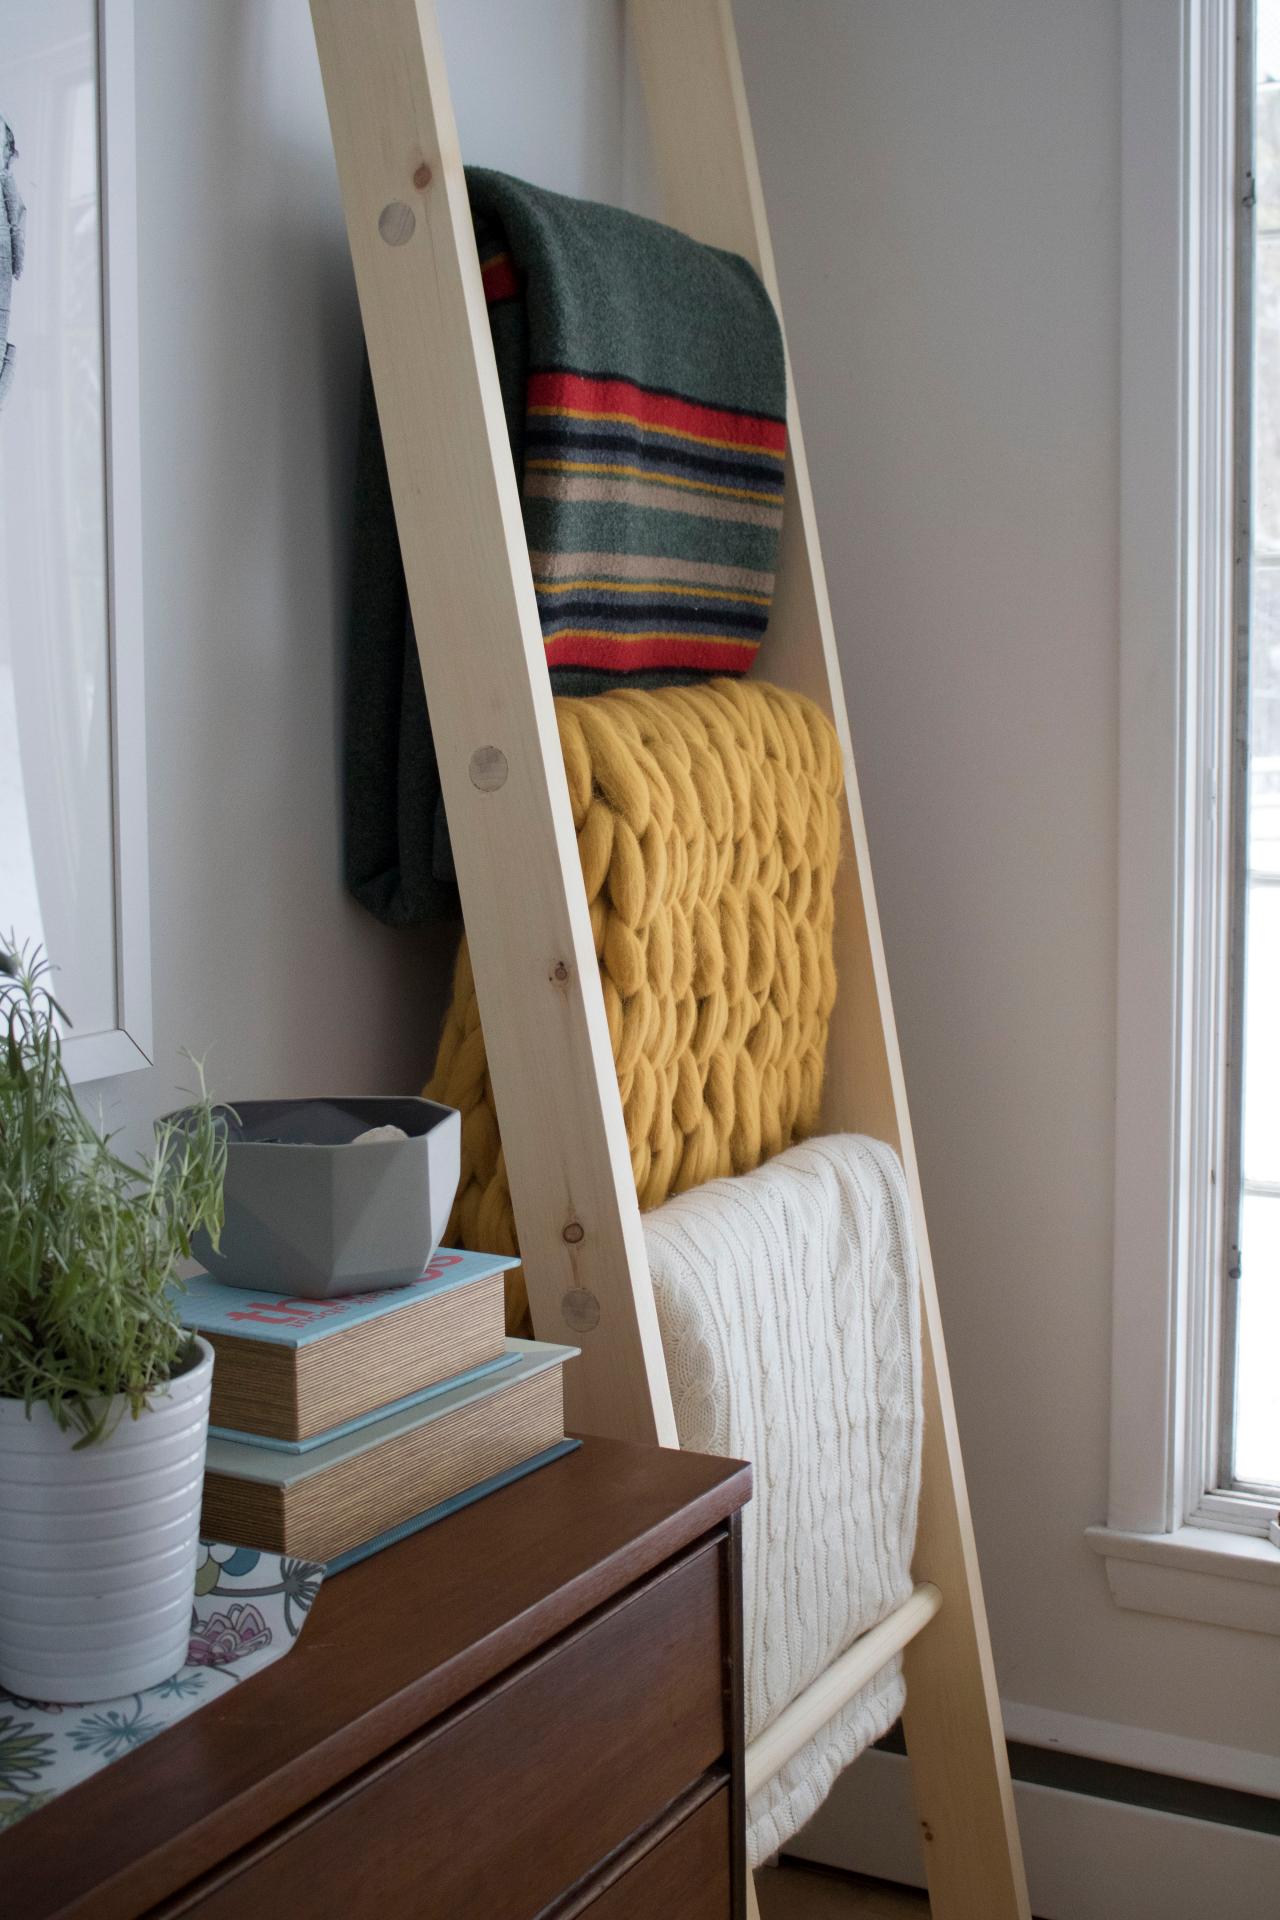 How to Build a Wooden Blanket Ladder DIY